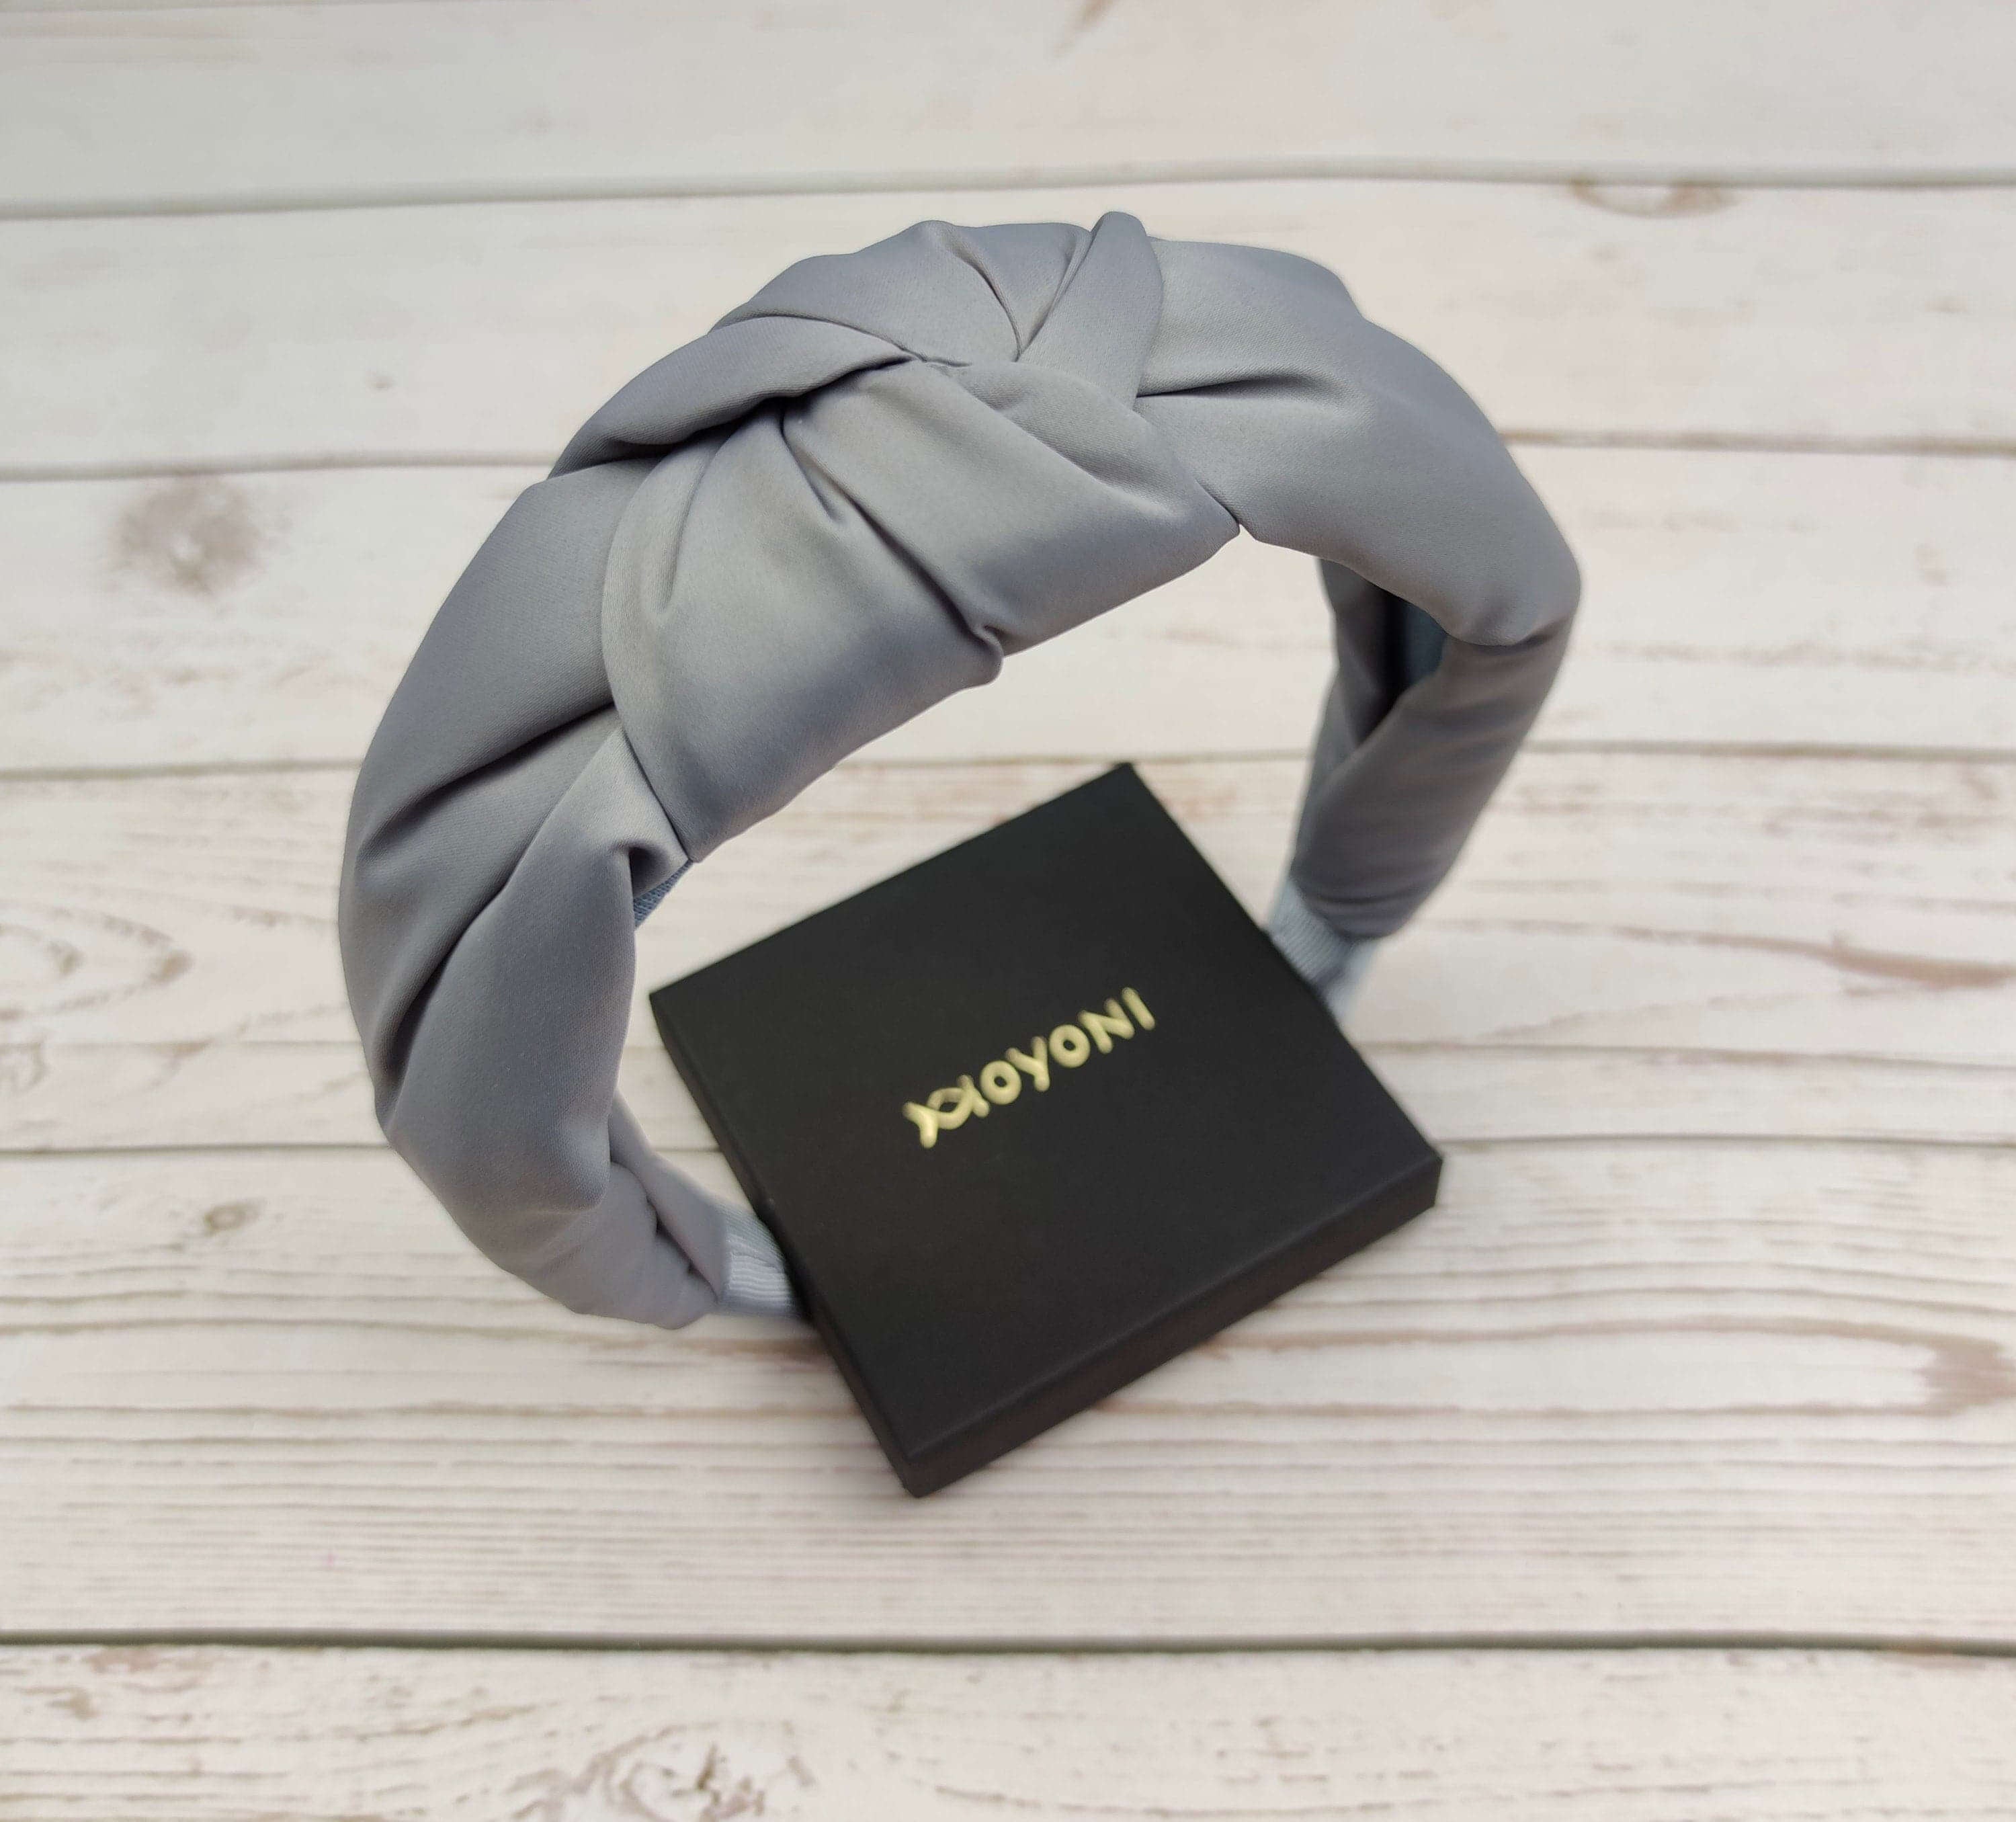 Classic and elegant, our grey headbands are perfect for any occasion! Wide headbands are the perfect addition to any style, and our knit headbands are made with love and care.